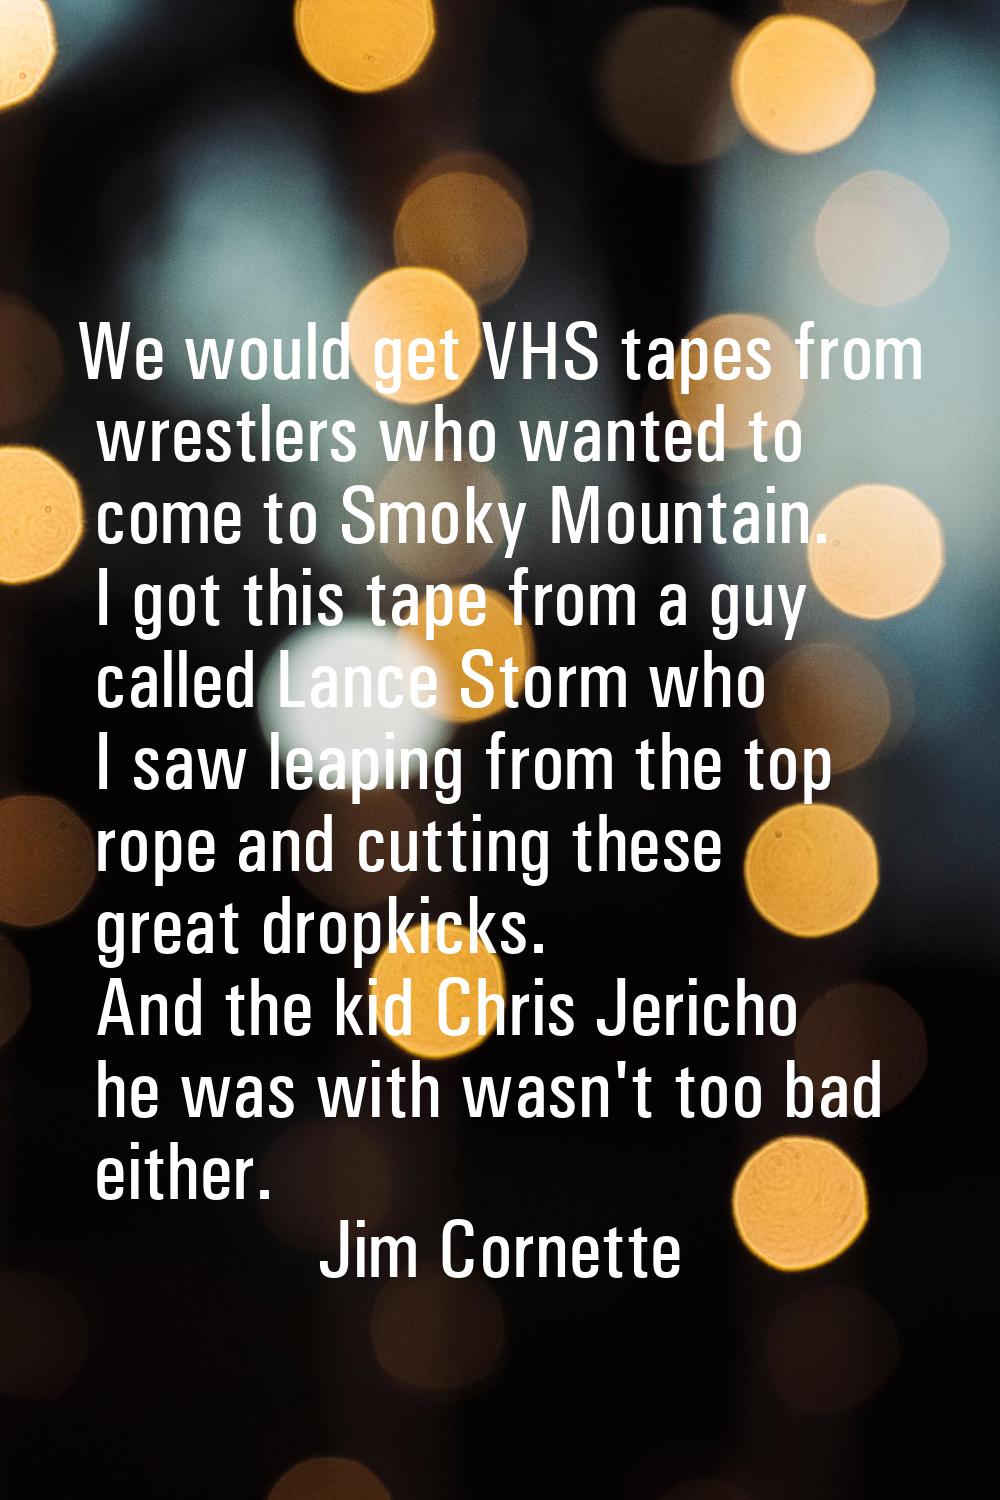 We would get VHS tapes from wrestlers who wanted to come to Smoky Mountain. I got this tape from a 